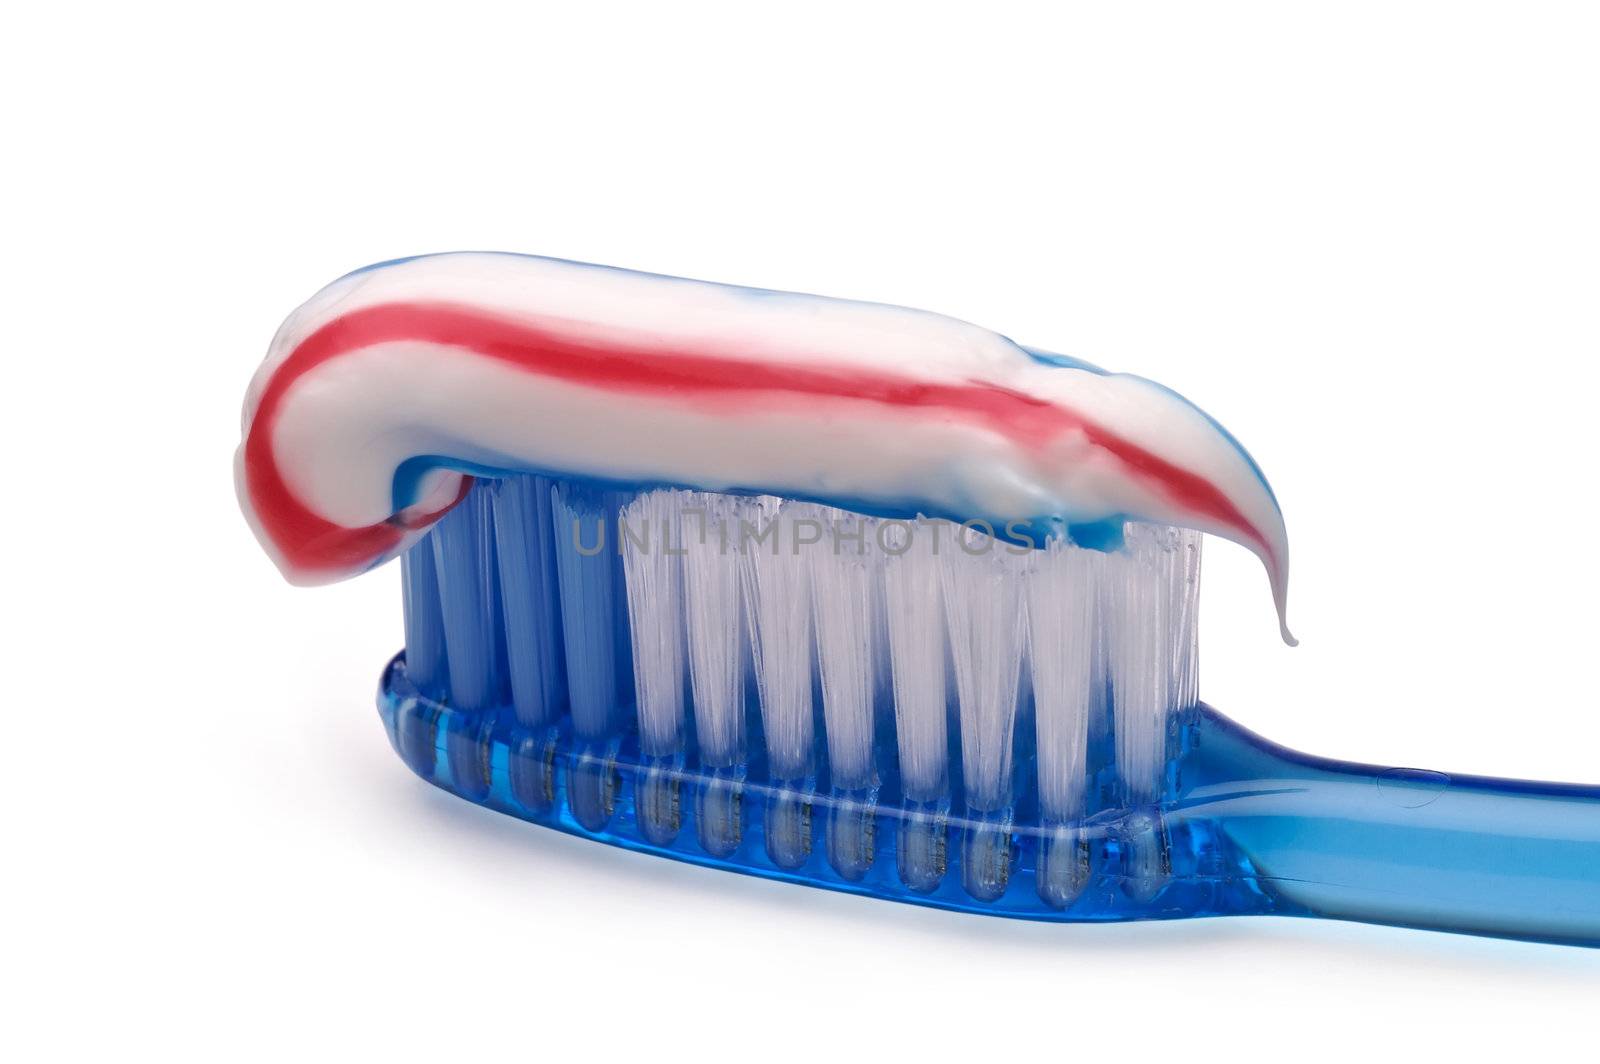 Translucent tooth brush with toothpaste w/ clipping path by Laborer